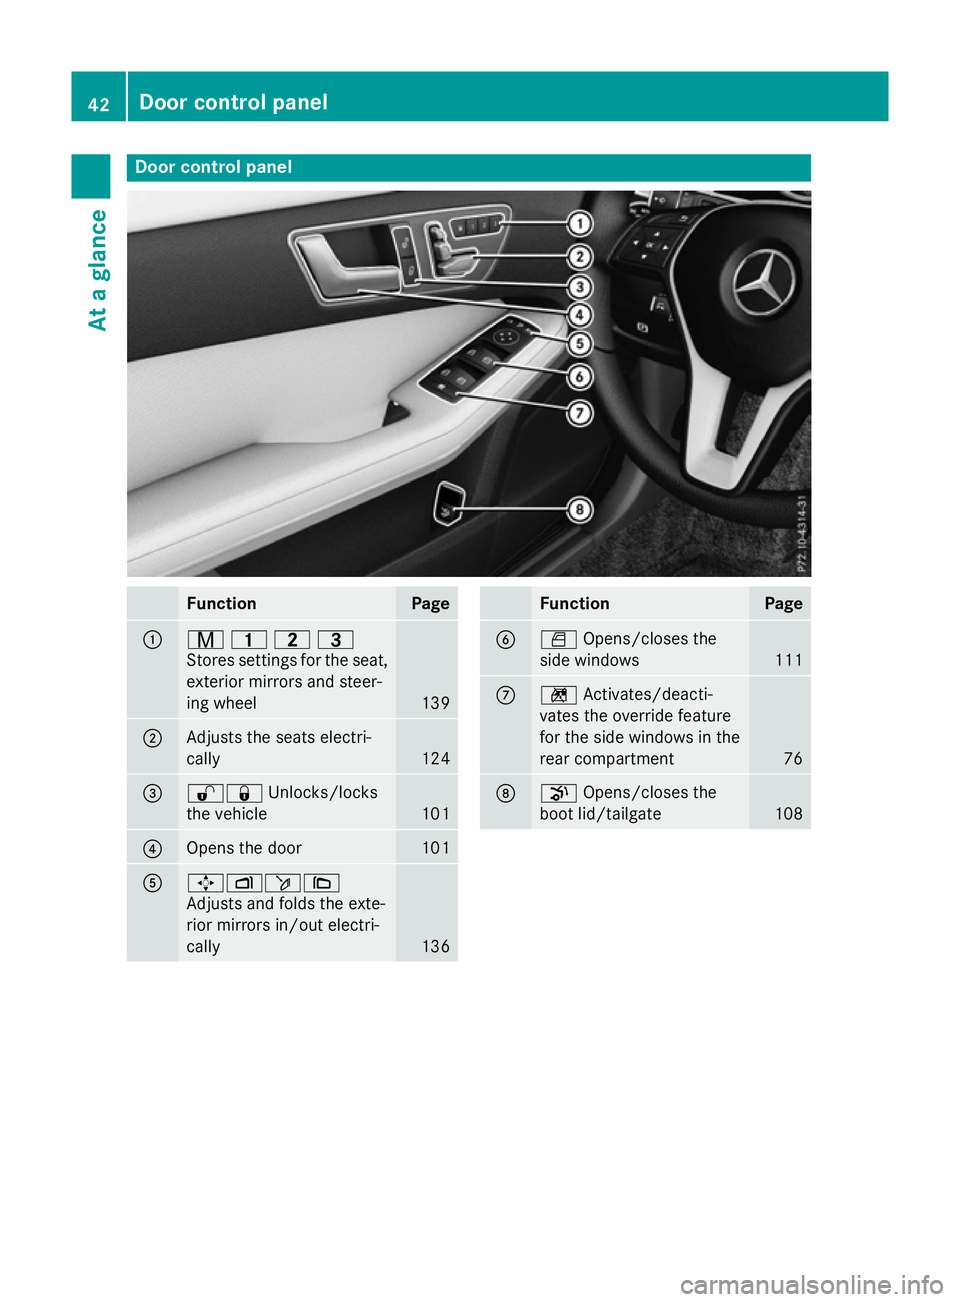 MERCEDES-BENZ E-CLASS ESTATE 2015  Owners Manual Door contro
lpanel Function Page
:
r
45=
Store ssettings for the seat,
exterio rmirrors and steer-
ing wheel 139
;
Adjusts the seats electri-
cally
124
=
%&
Unlocks/locks
the vehicle 101
?
Opens the d